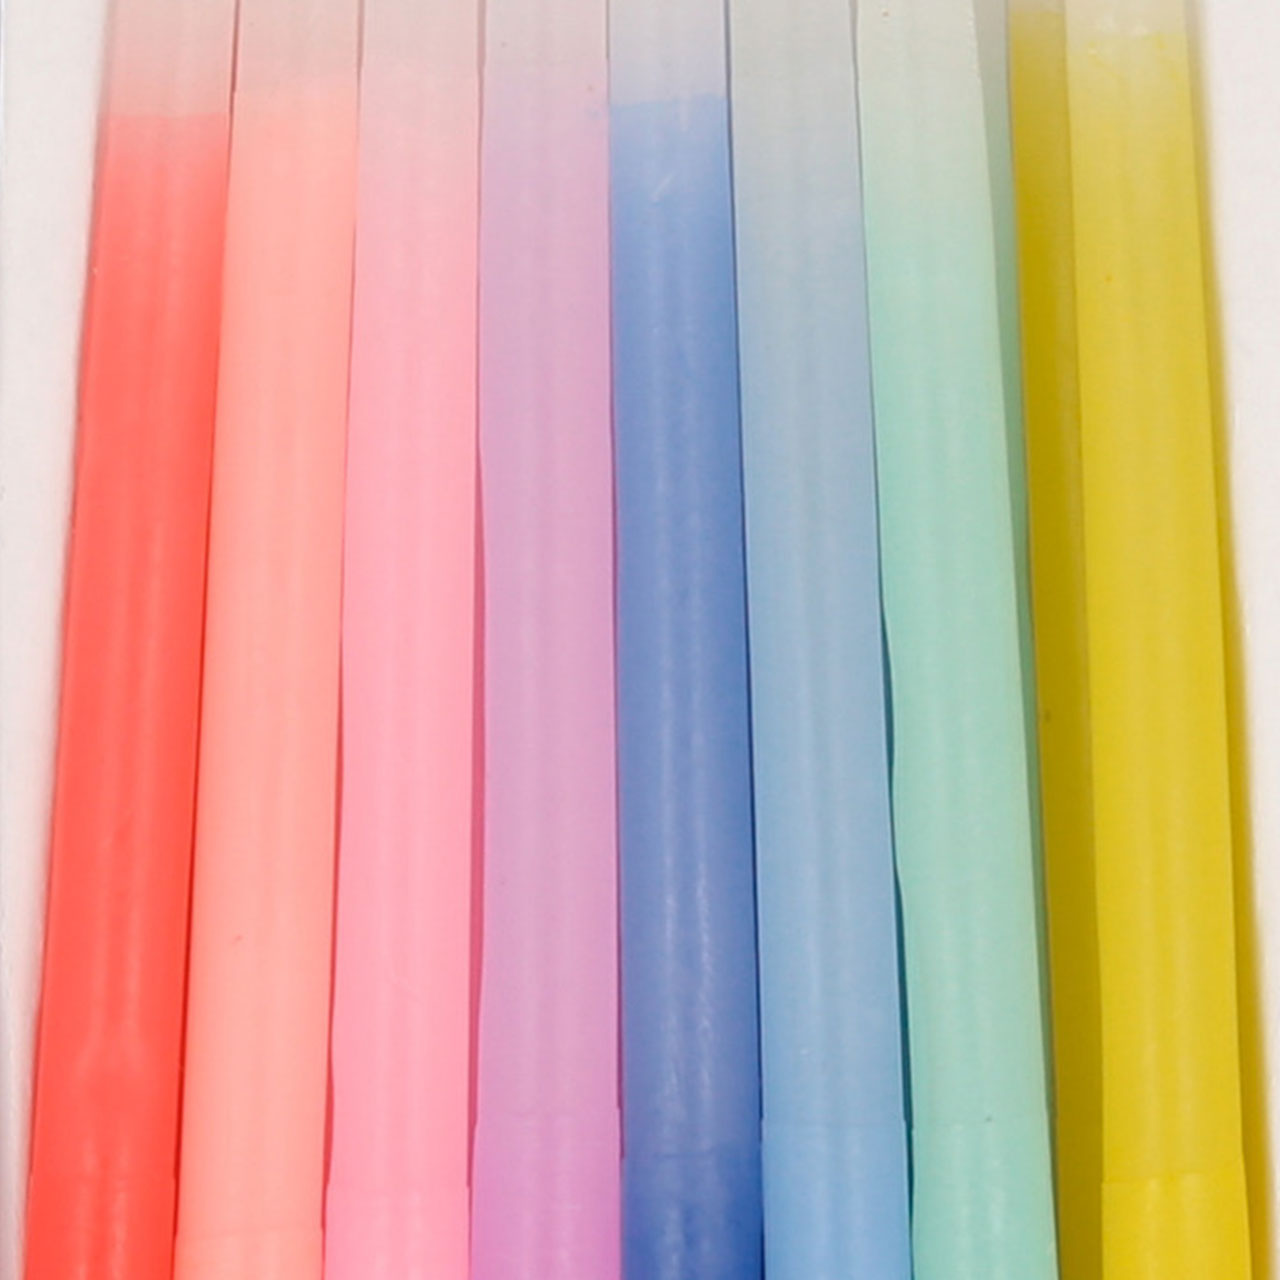 16 Rainbow Dipped Tapered Candles